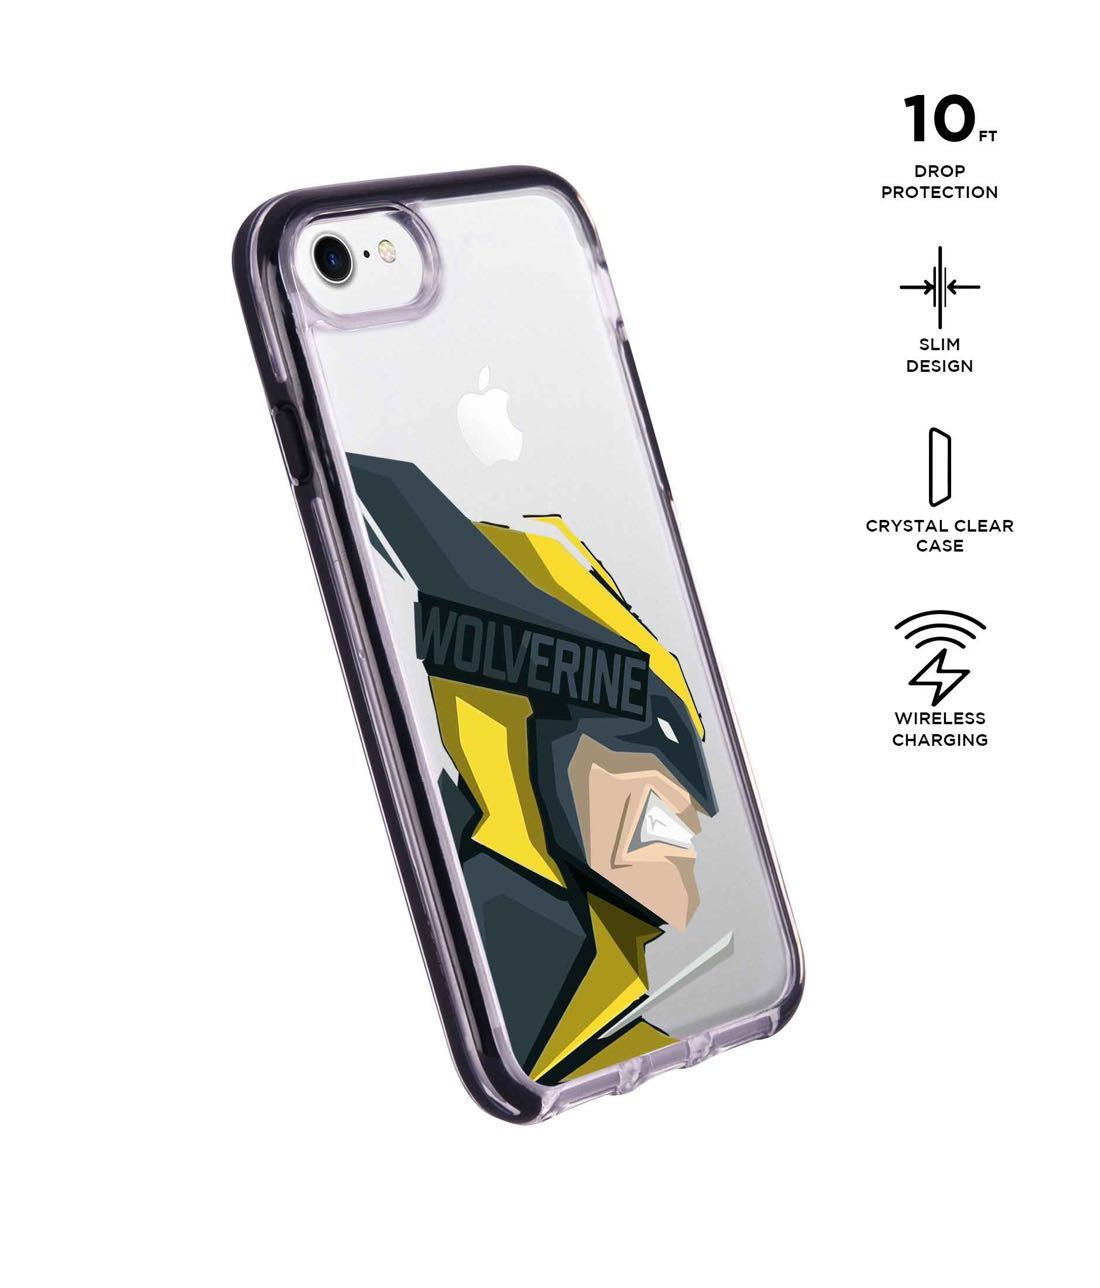 Dont Mess with Wolverine - Extreme Phone Case for iPhone 7